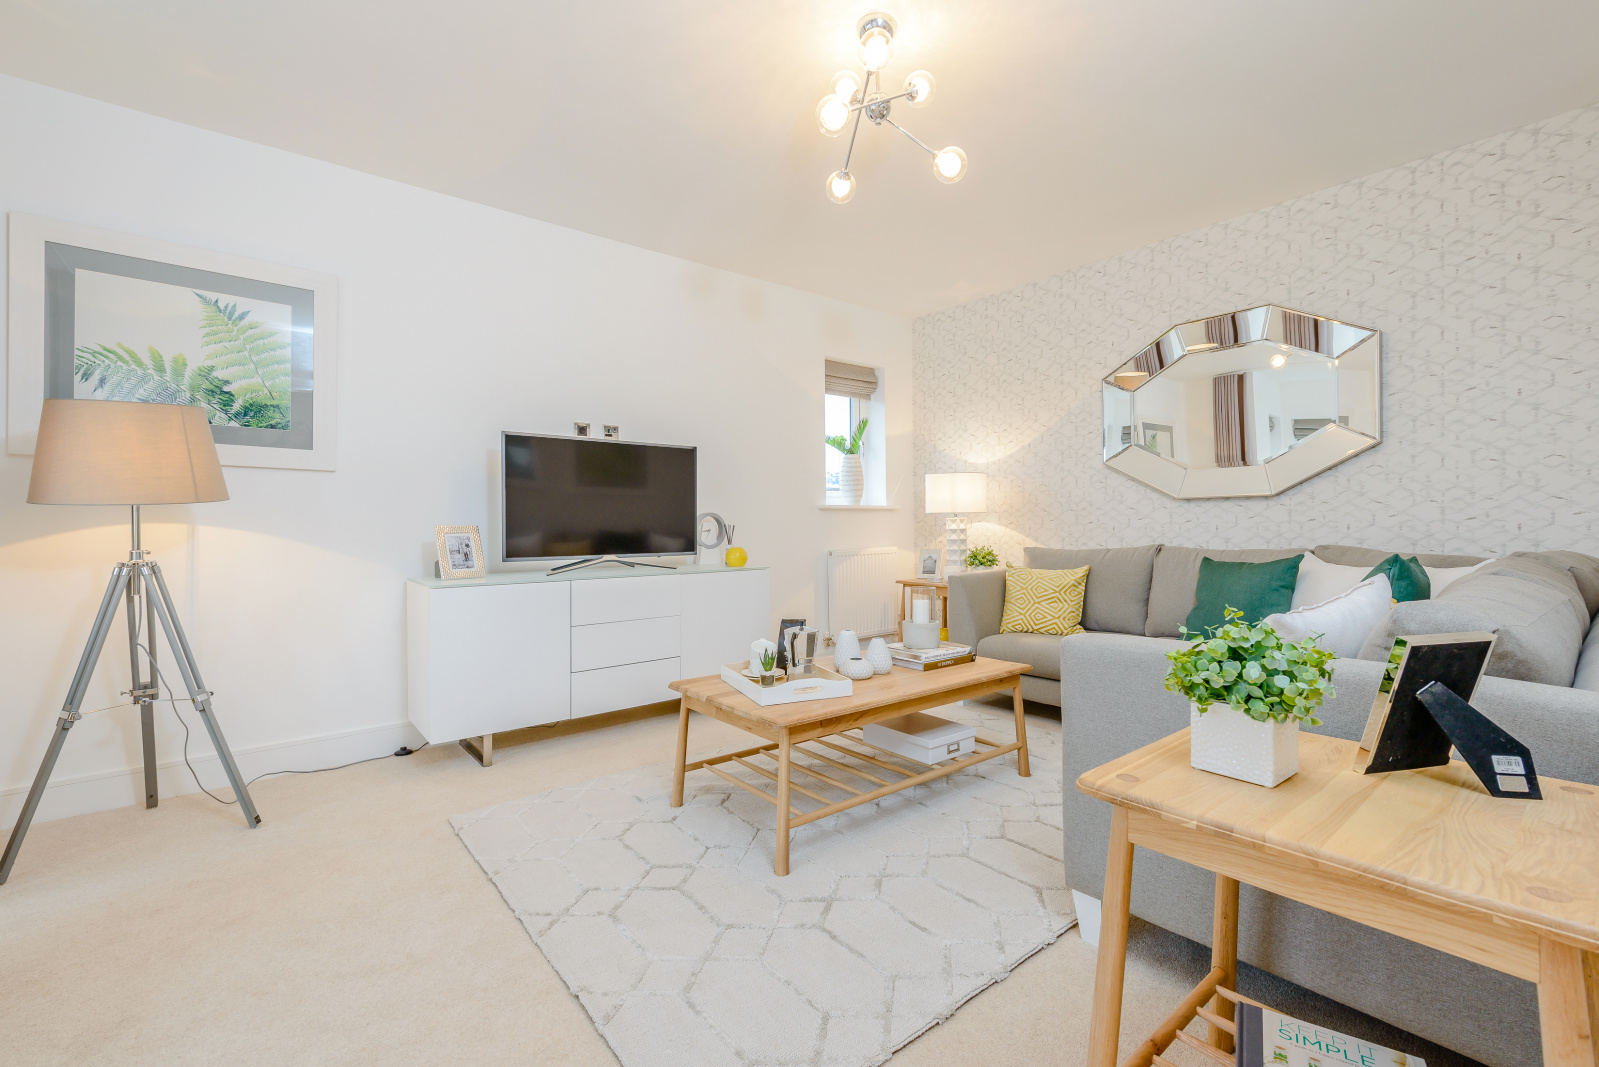 New homes in Bristol, new homes in Engine Common - The Hinton